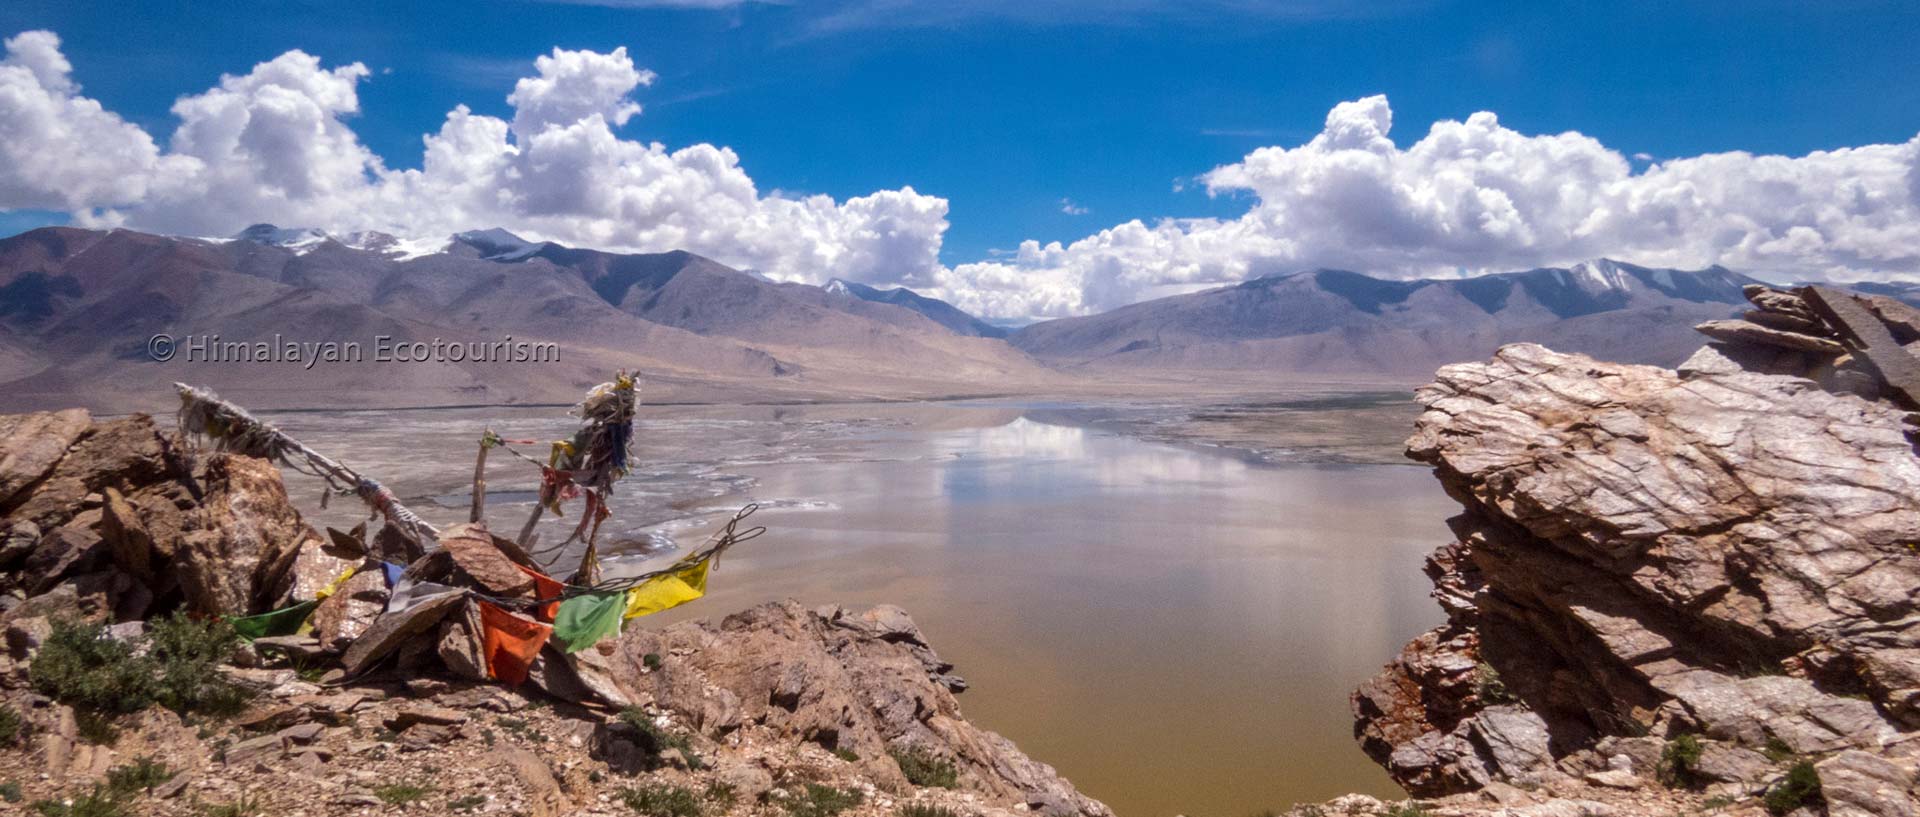 Beautiful Photos of Life in the Mystical Moonland of Ladakh, India